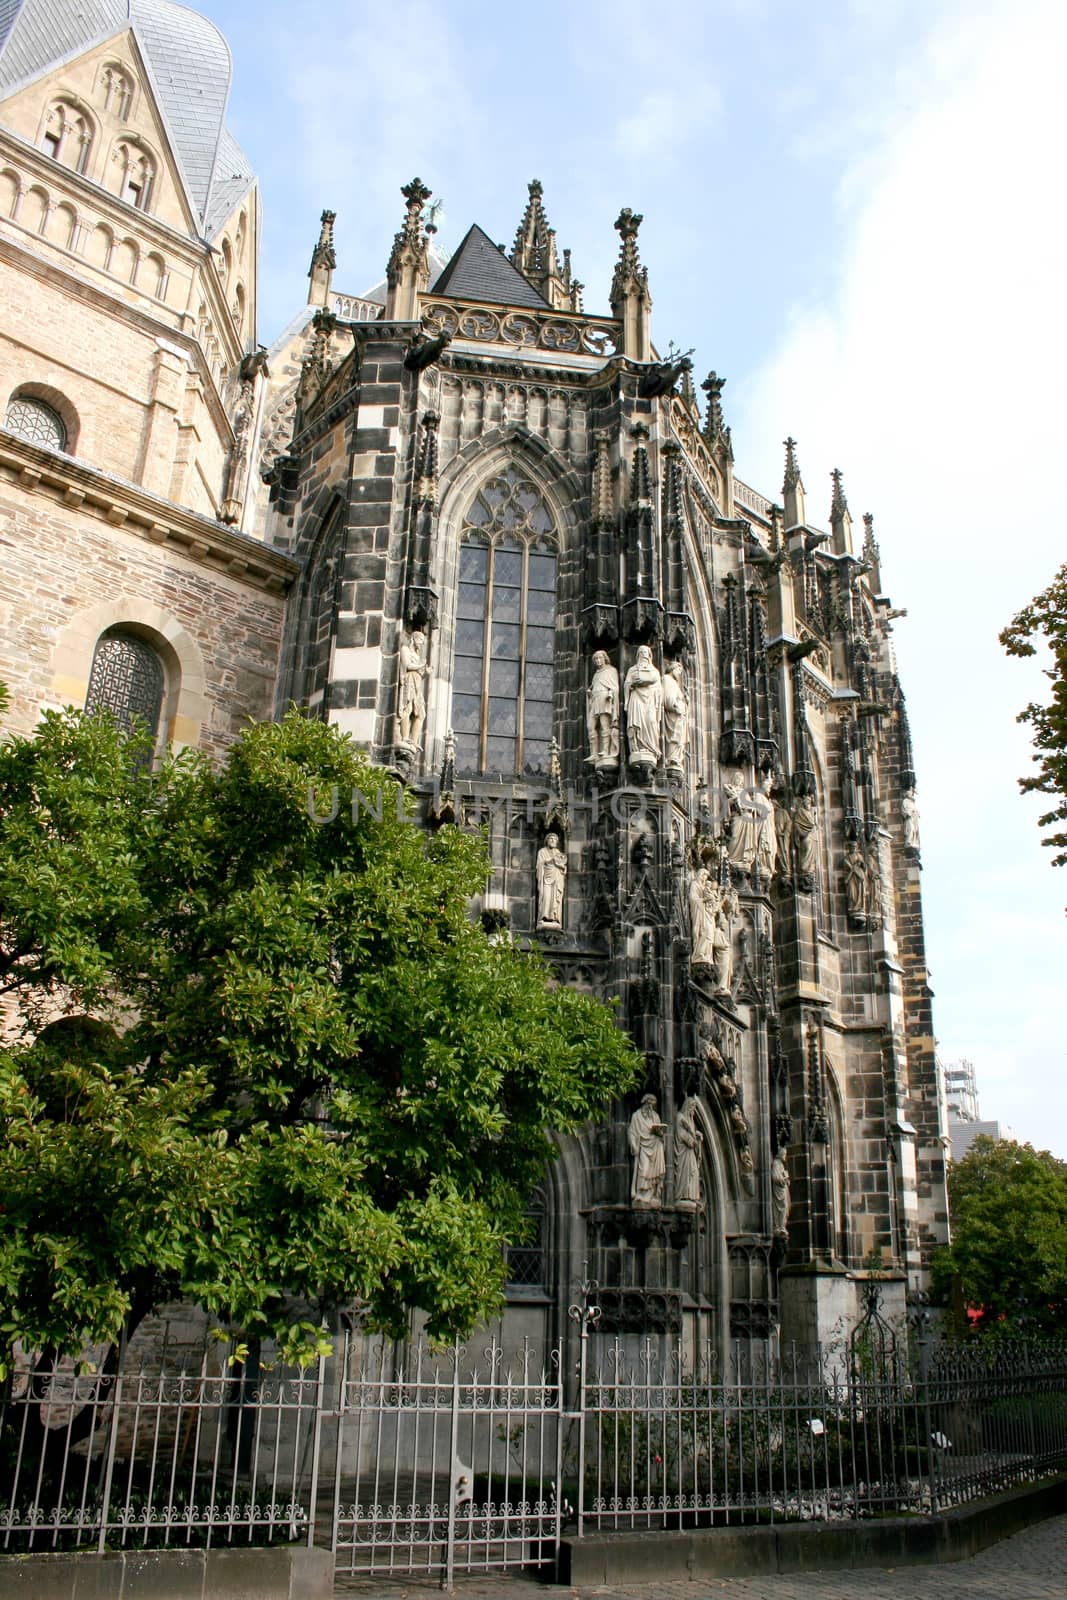 Side view of a church, with statues on the fa�ade